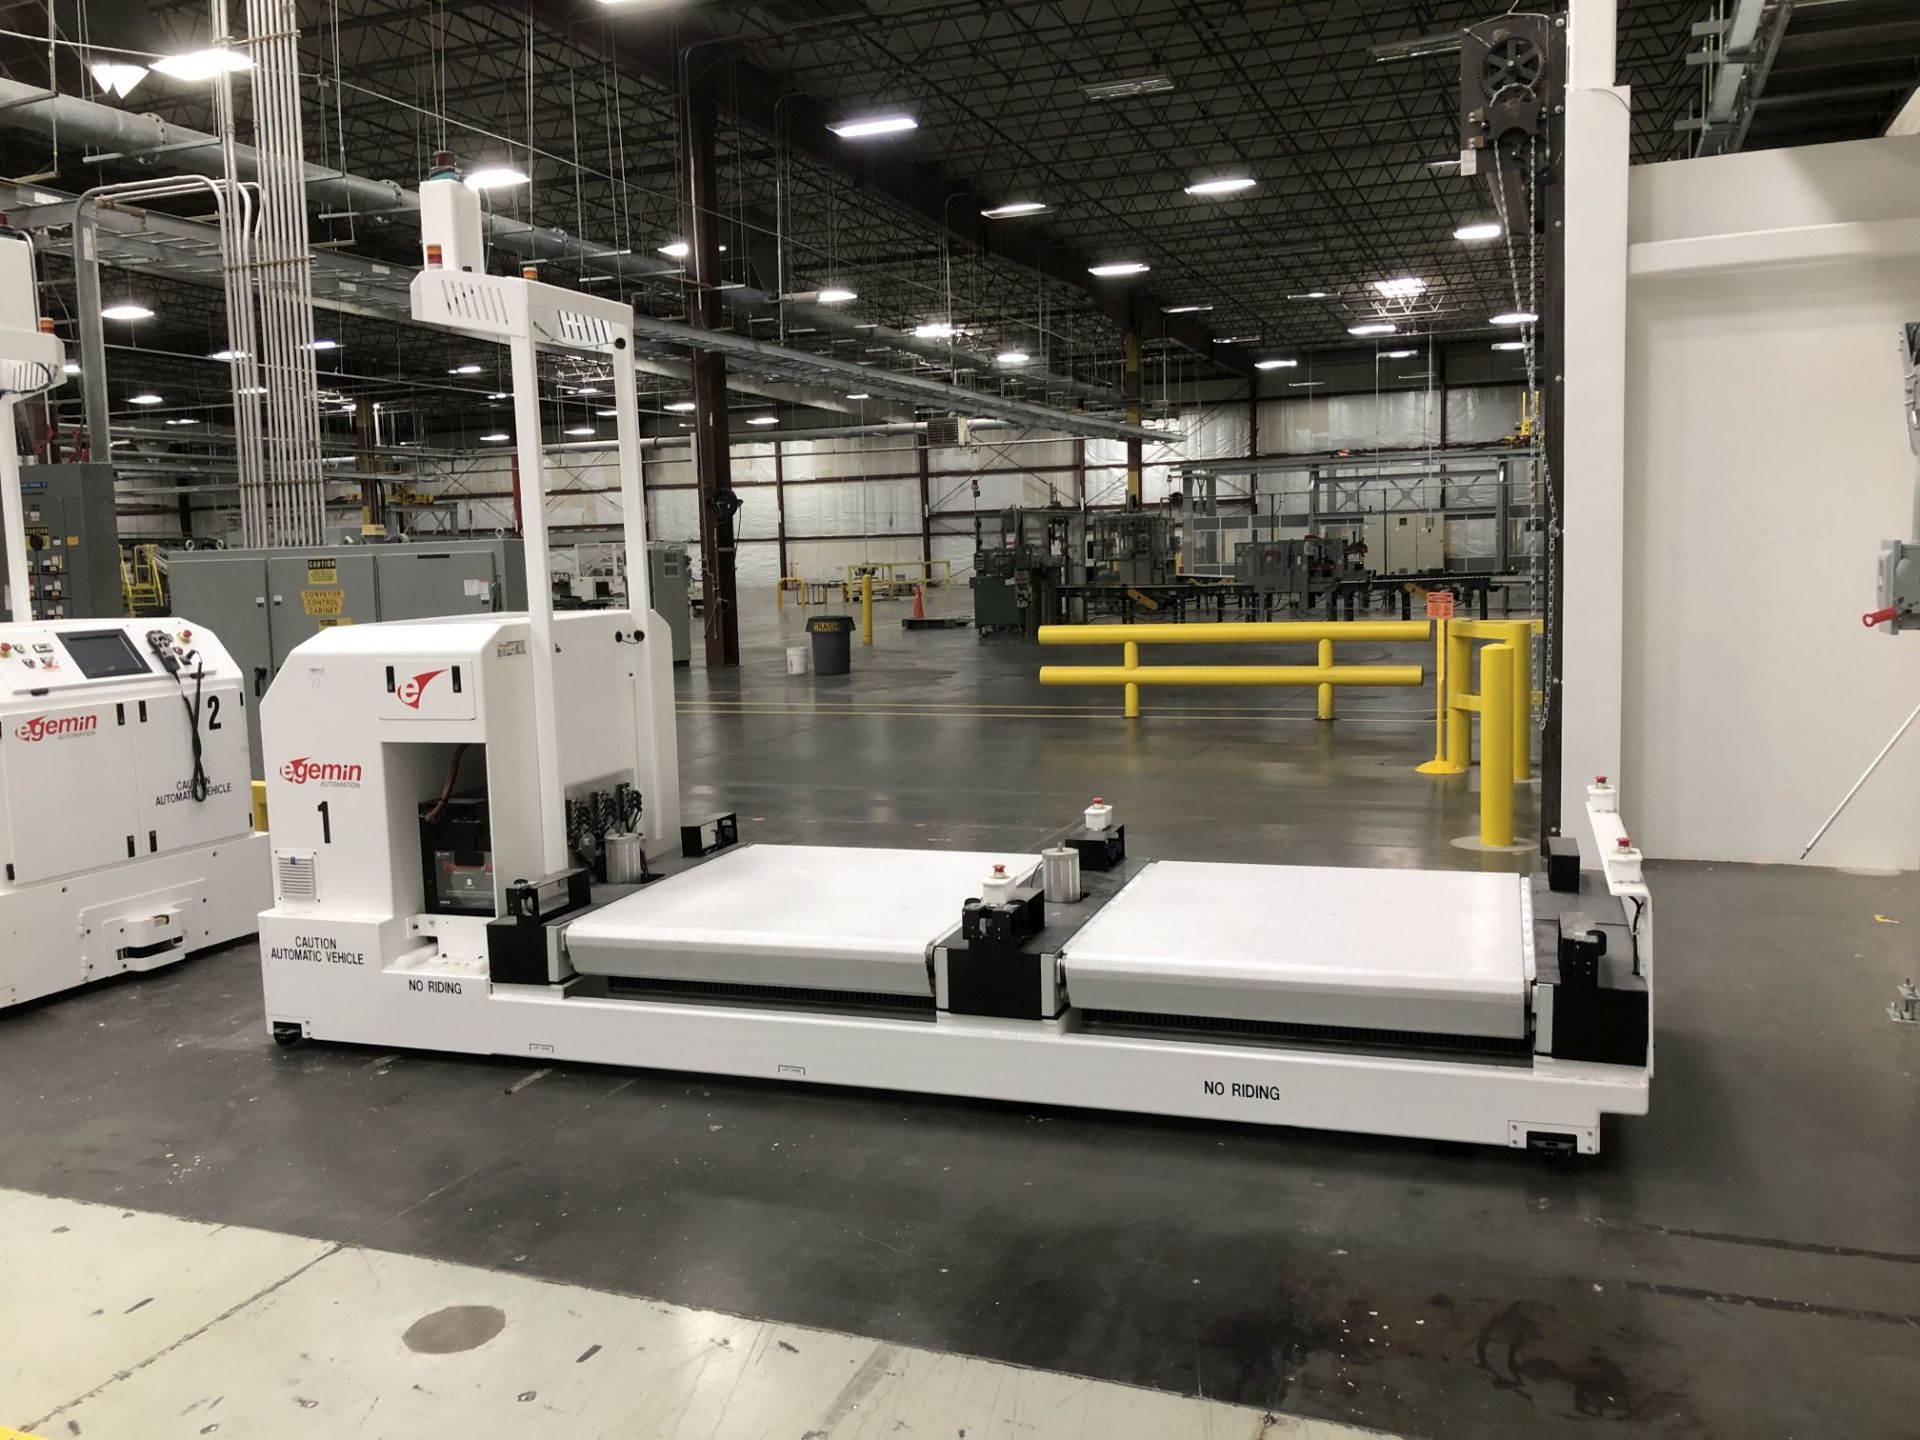 2017 Egemin Automation Unit Load Deck Automated Guided Vehicle (AGV), Model LTV 0515 L, 300 FPM